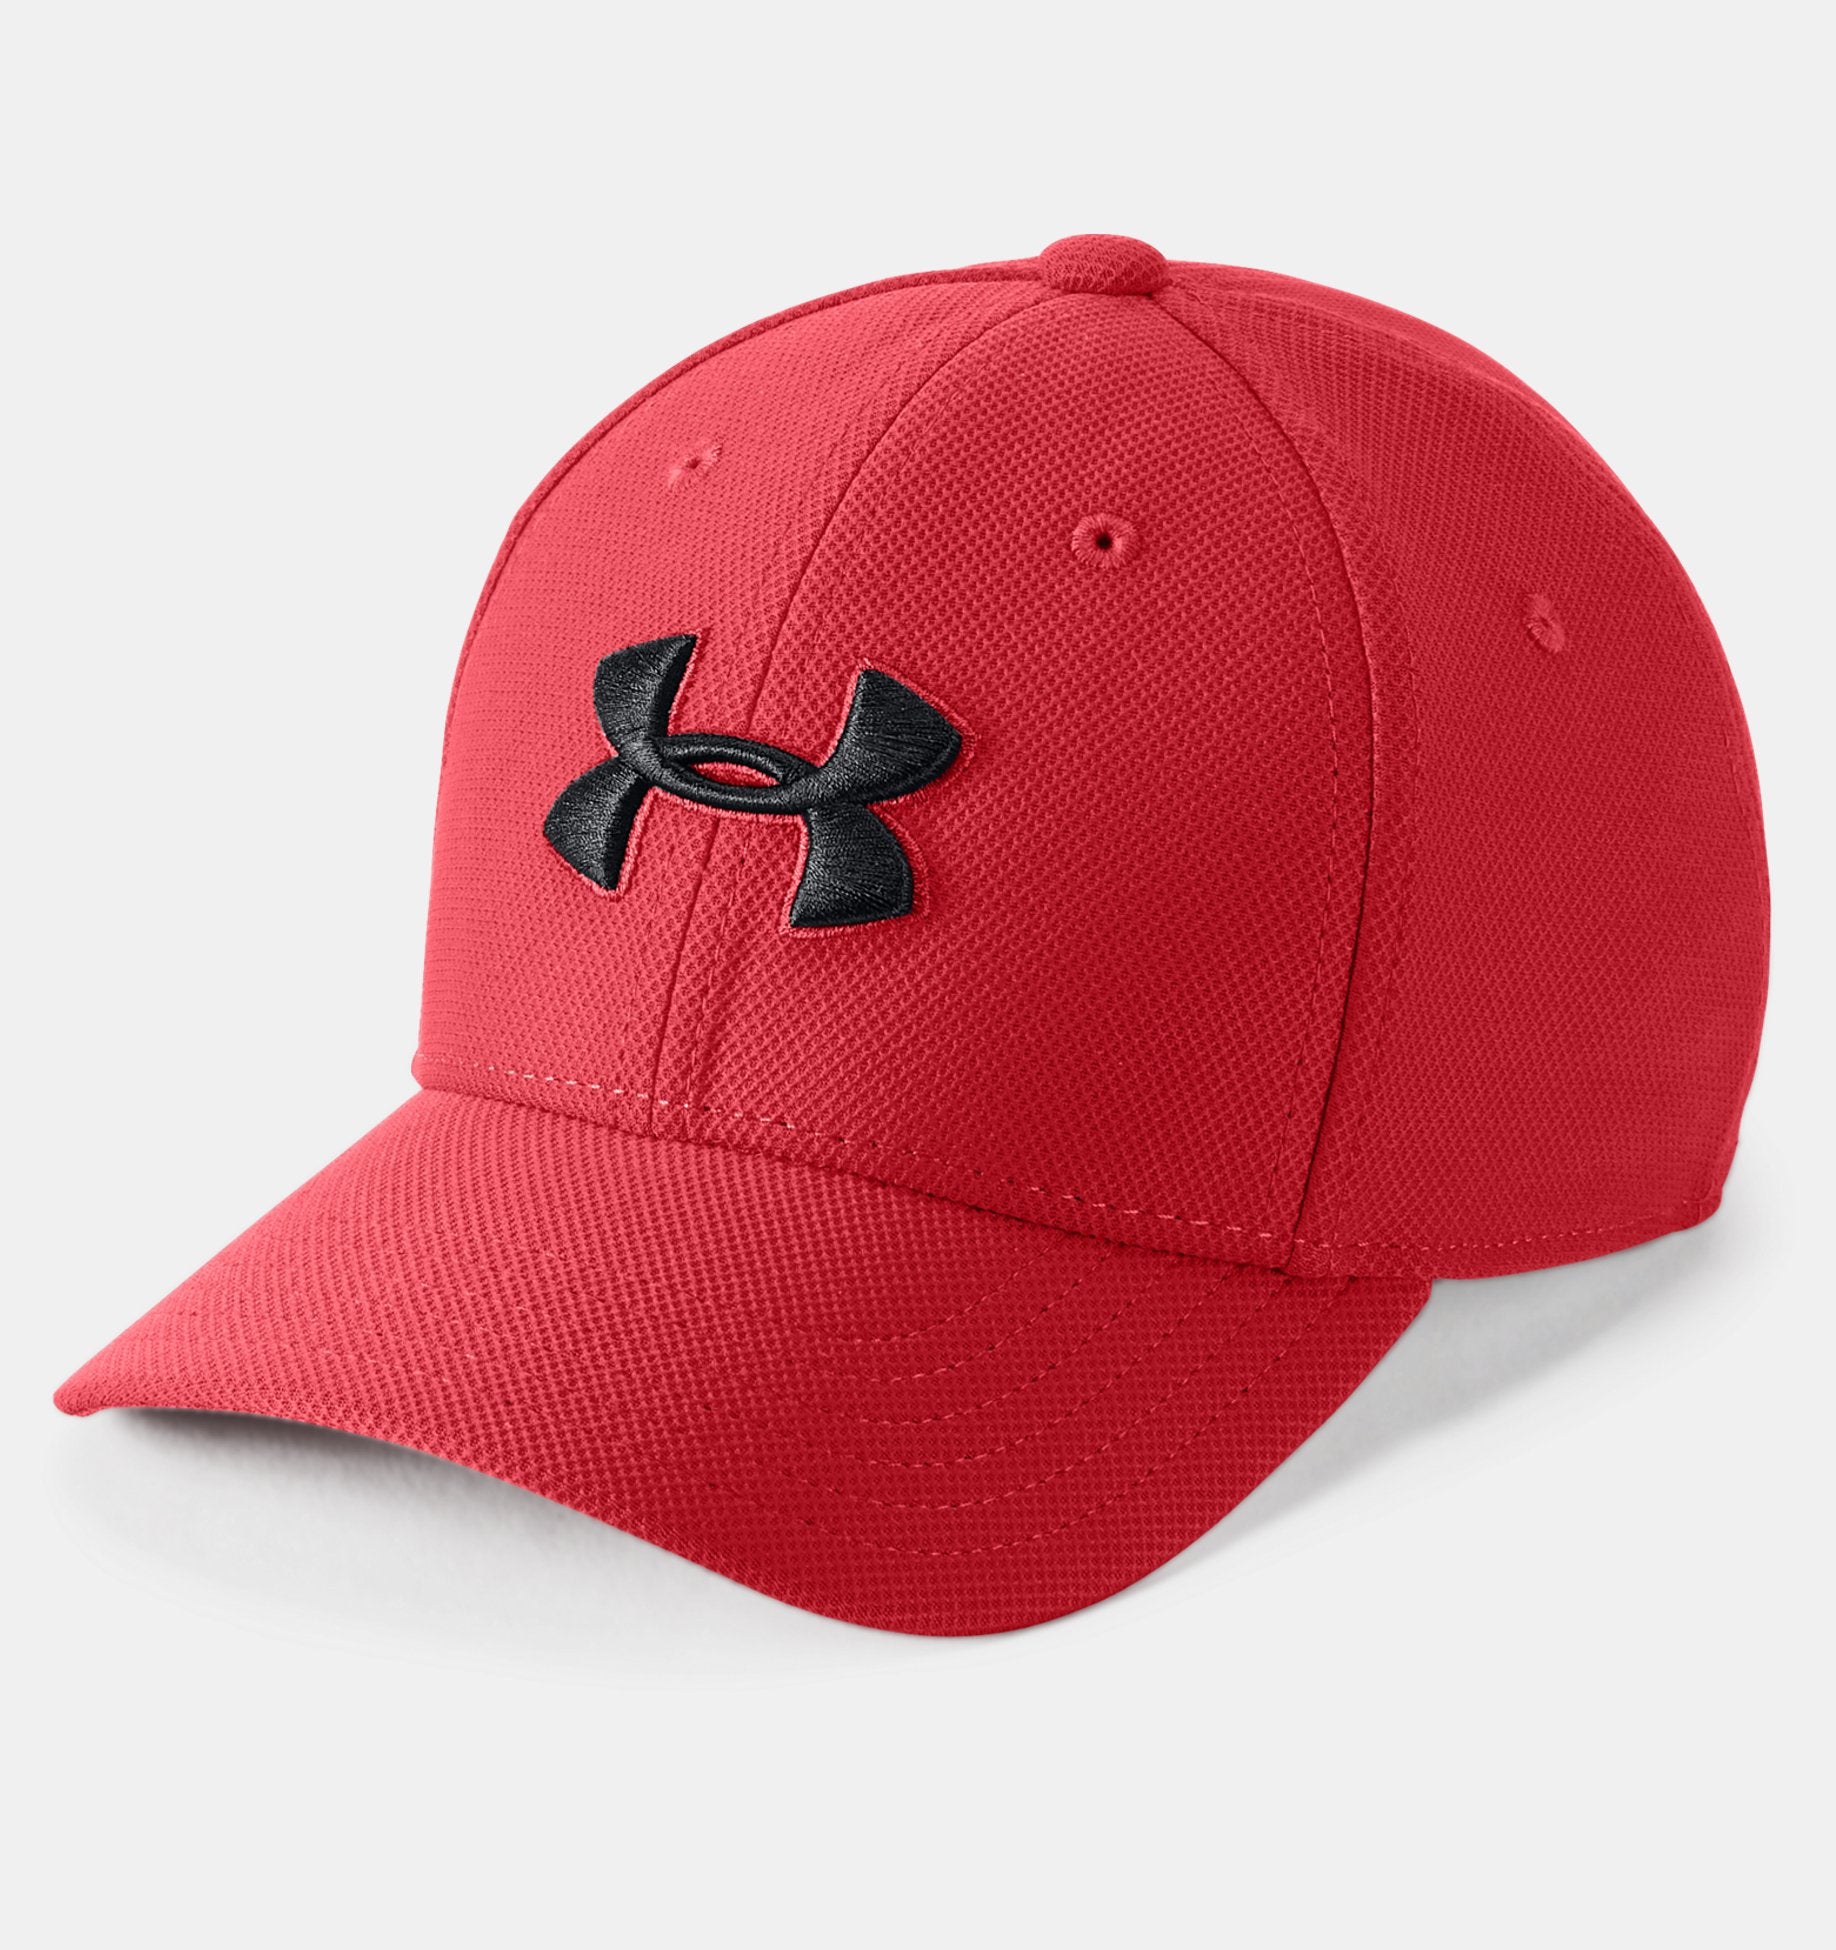 Boys' Red Blitzing 3.0 Cap | Under Armour